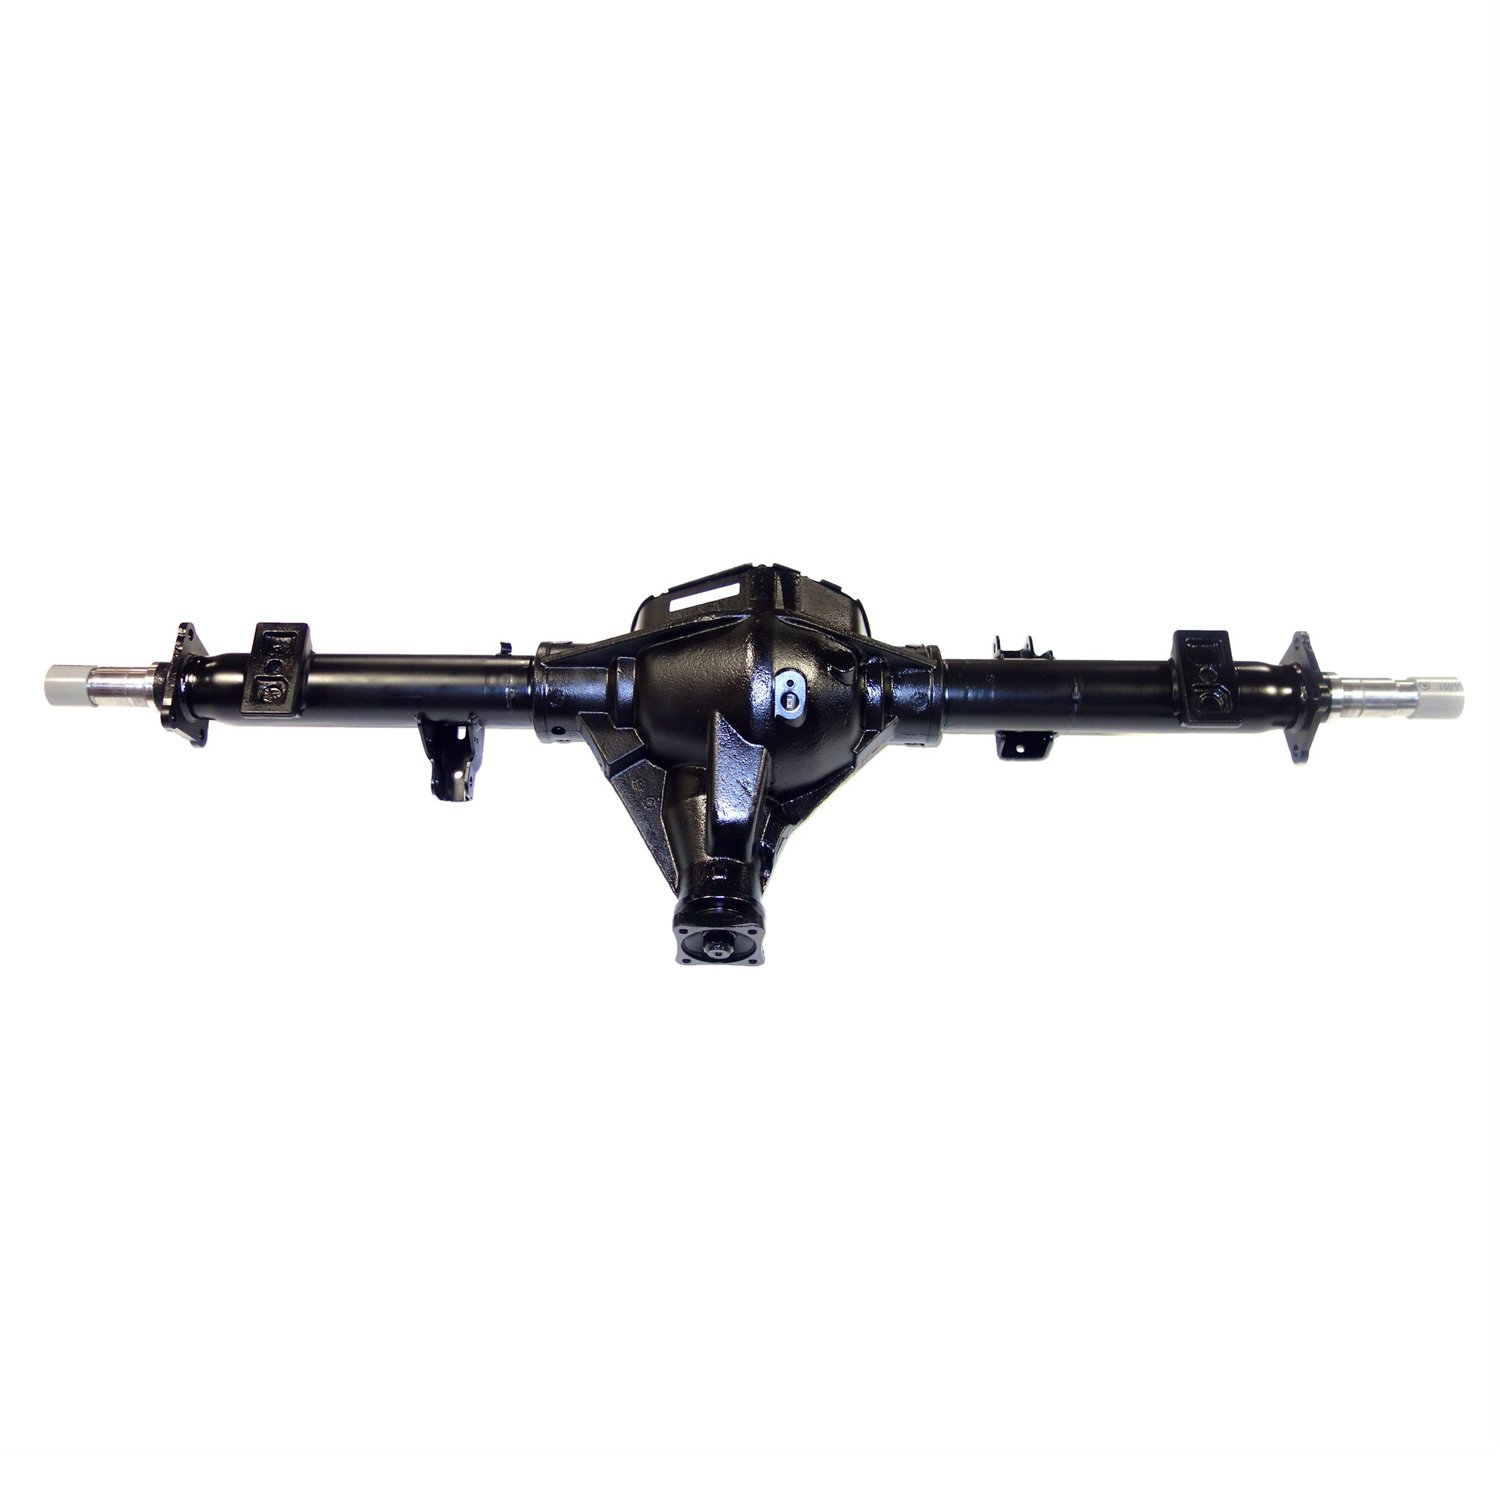 Remanufactured Axle Assy for Chy 11.5" 2009 Ram 2500 & 3500 3.73 , SRW, 2wd, Posi LSD